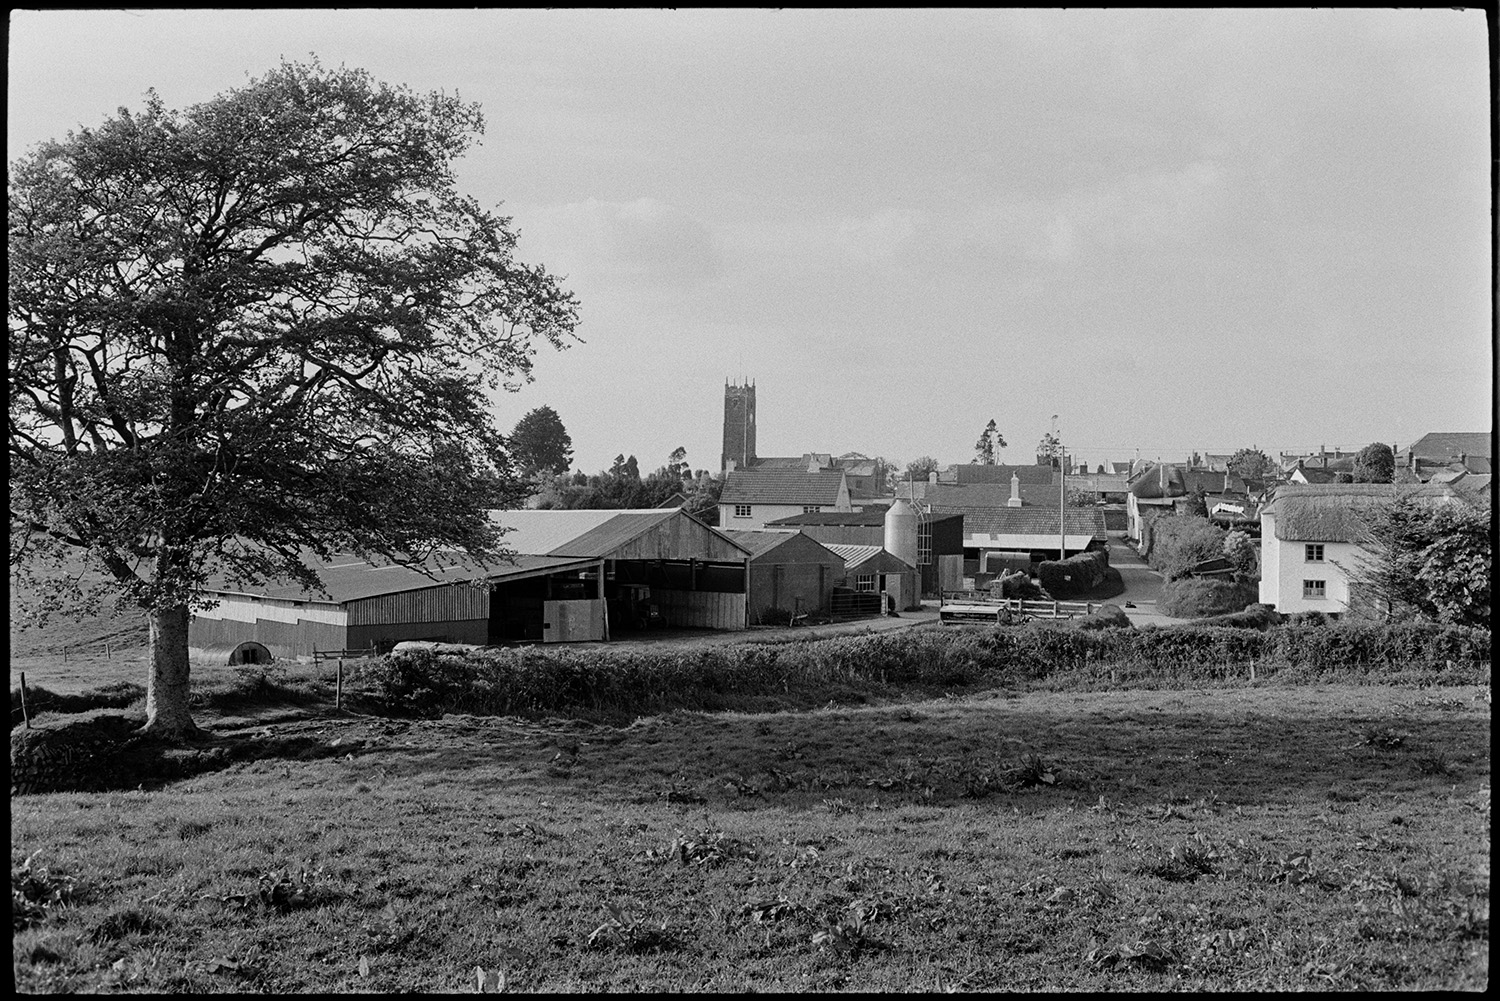 Scenes around village comparison shots with old photos.
[A scene taken from a field of a farmyard with a silo and barns at High Bickington. The church tower and other houses in the village are visible in the background.]